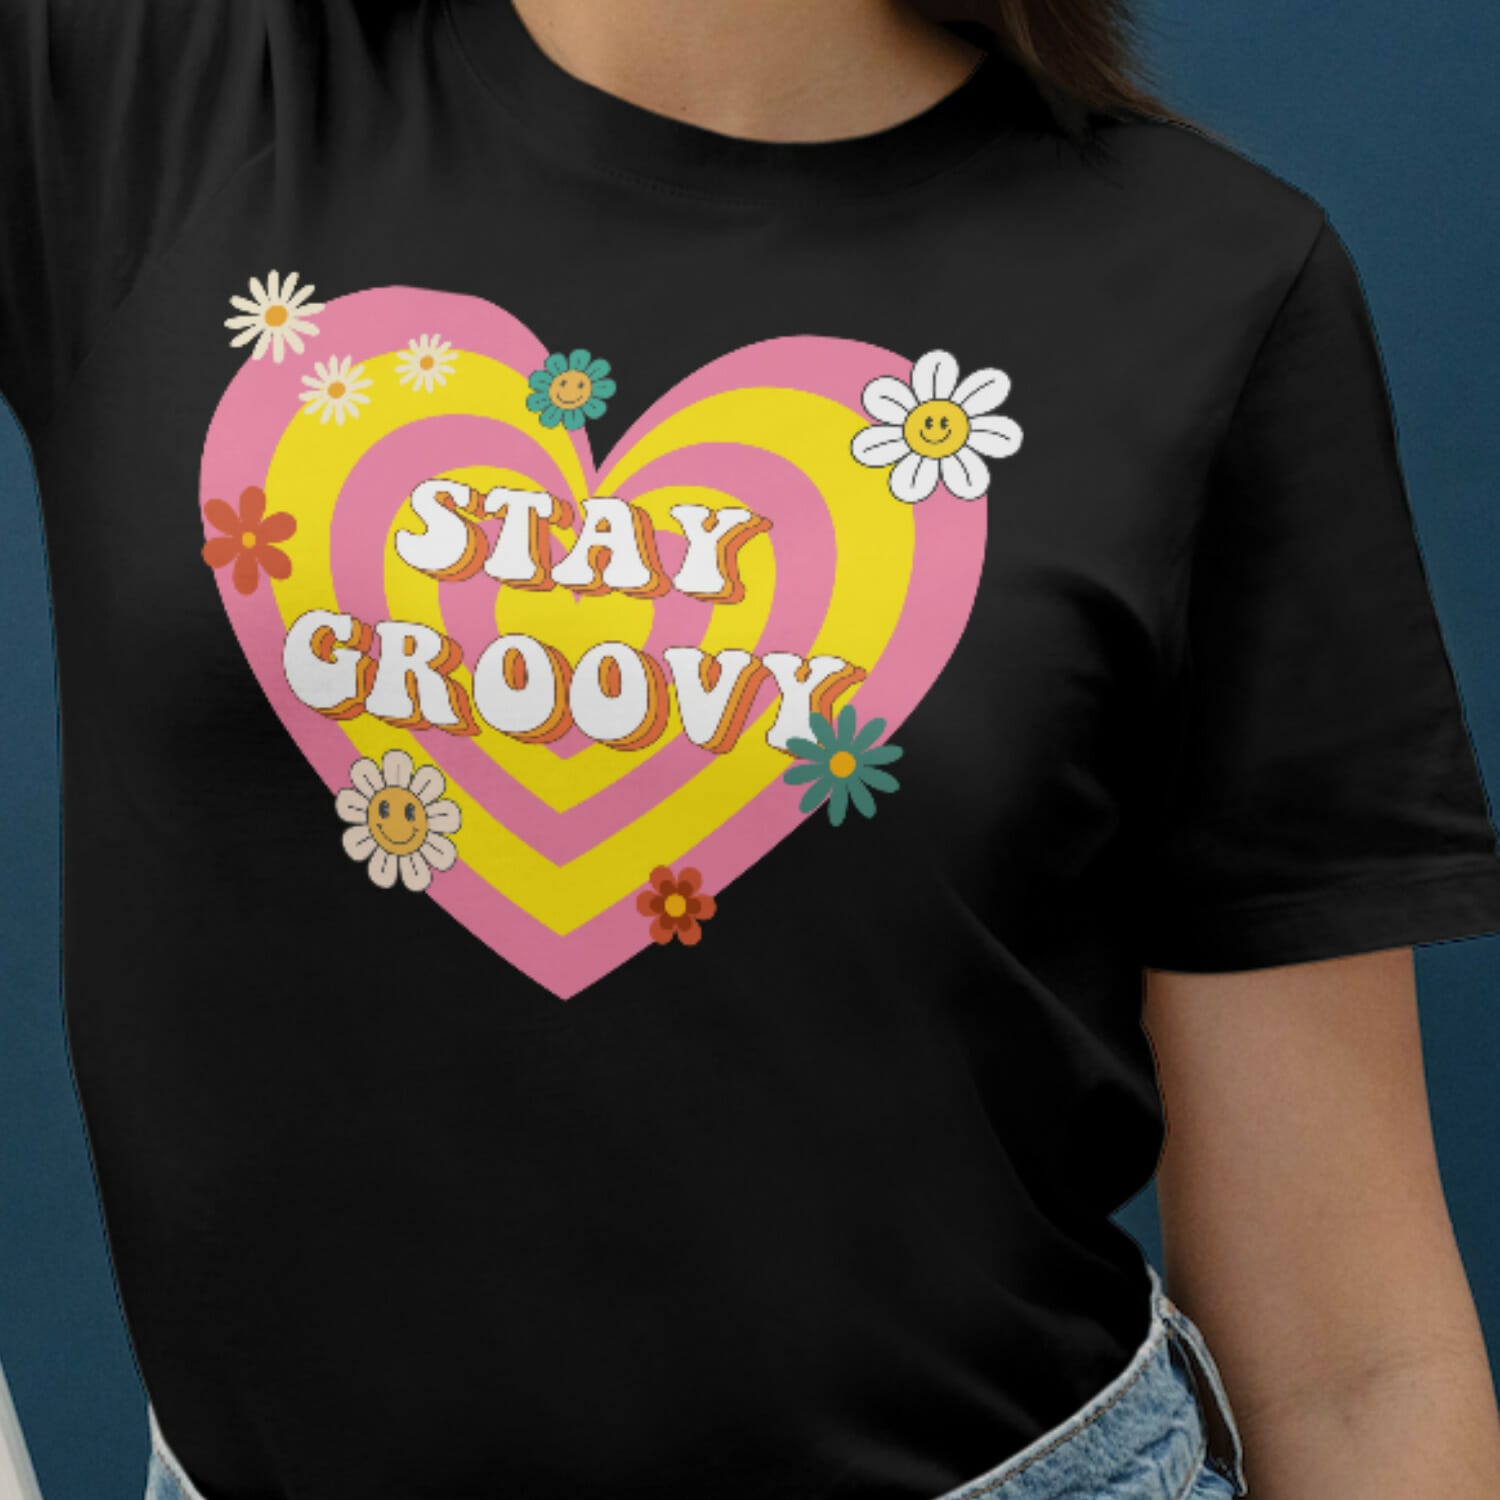 Stay Groovy T Shirt Design For Women